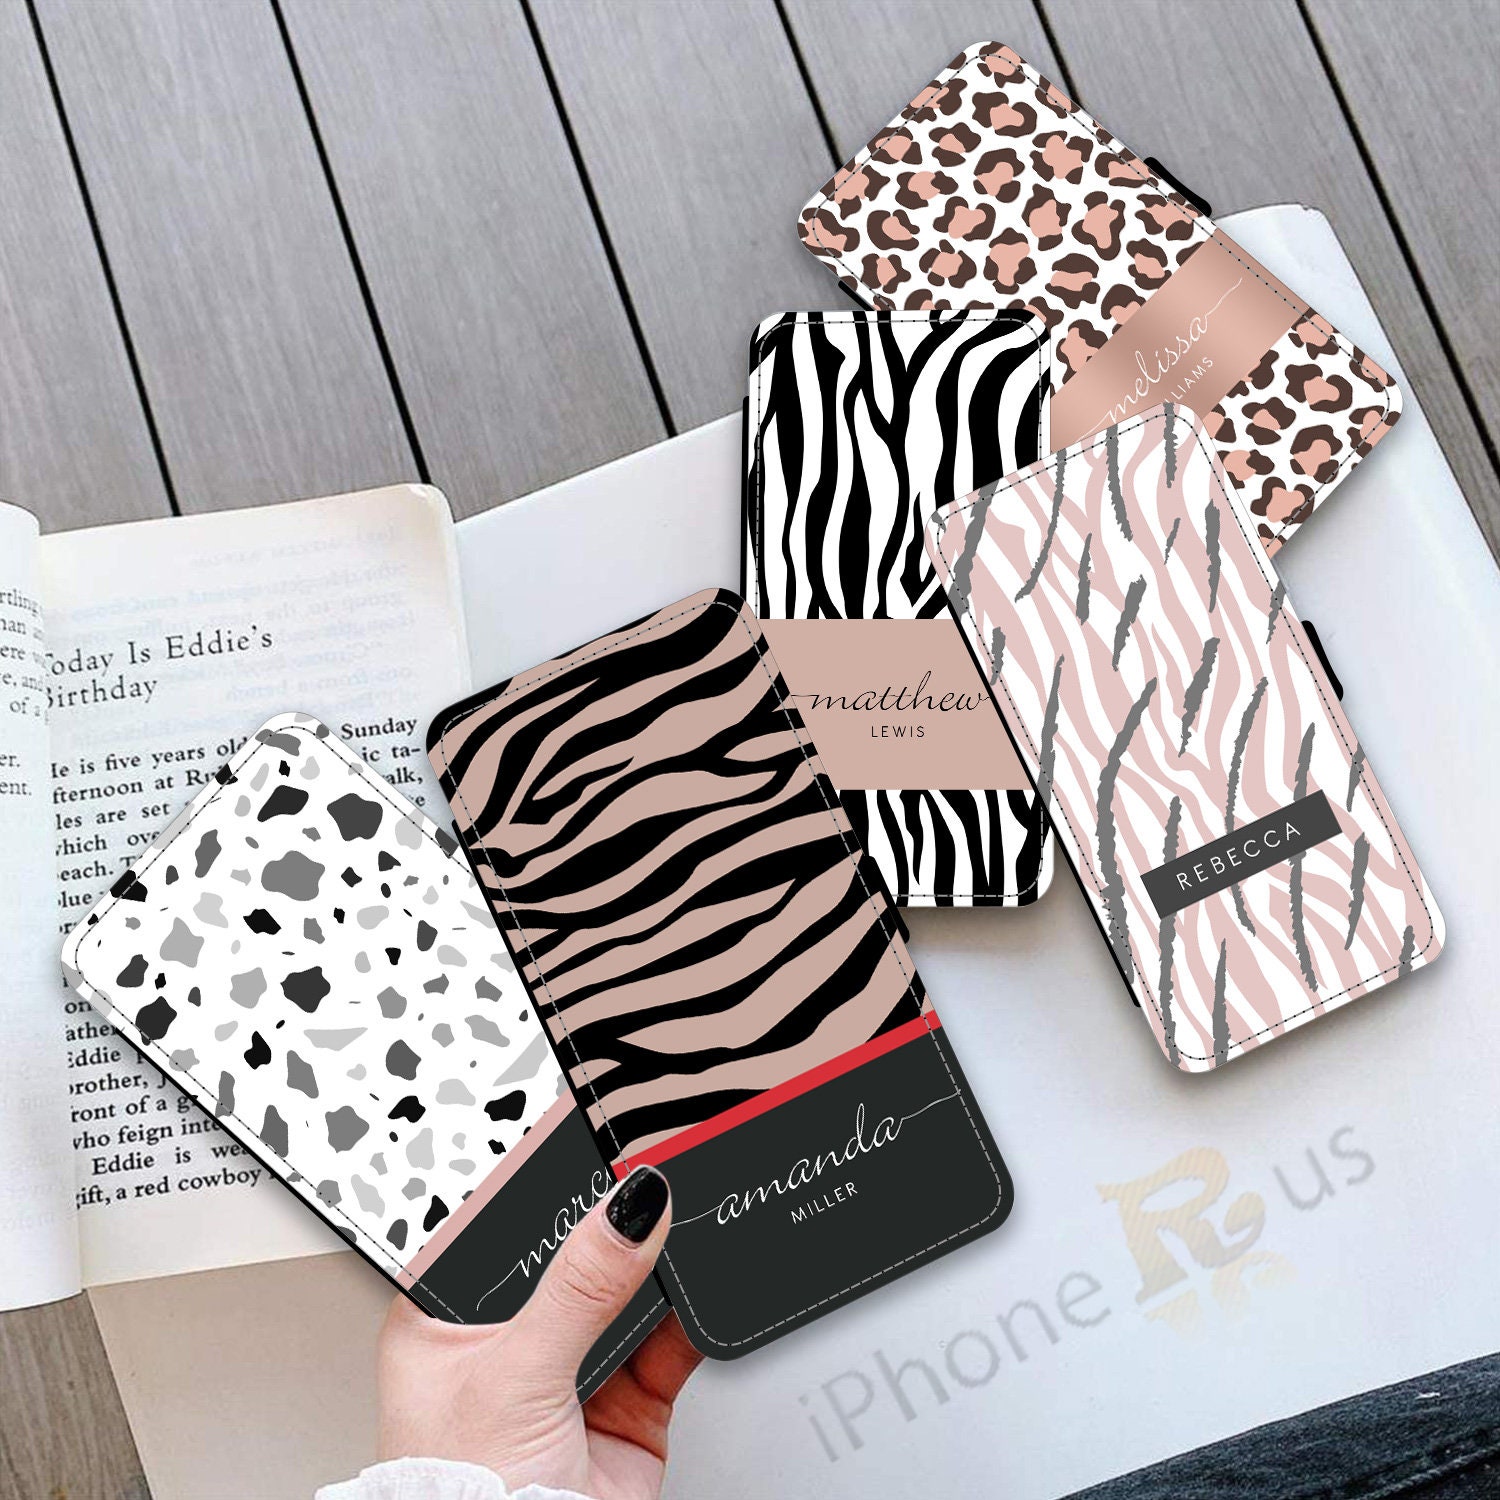 For Samsung Galaxy S10 S20 S21 S22 S23 Leopard Leather Flip Wallet Phone  Case